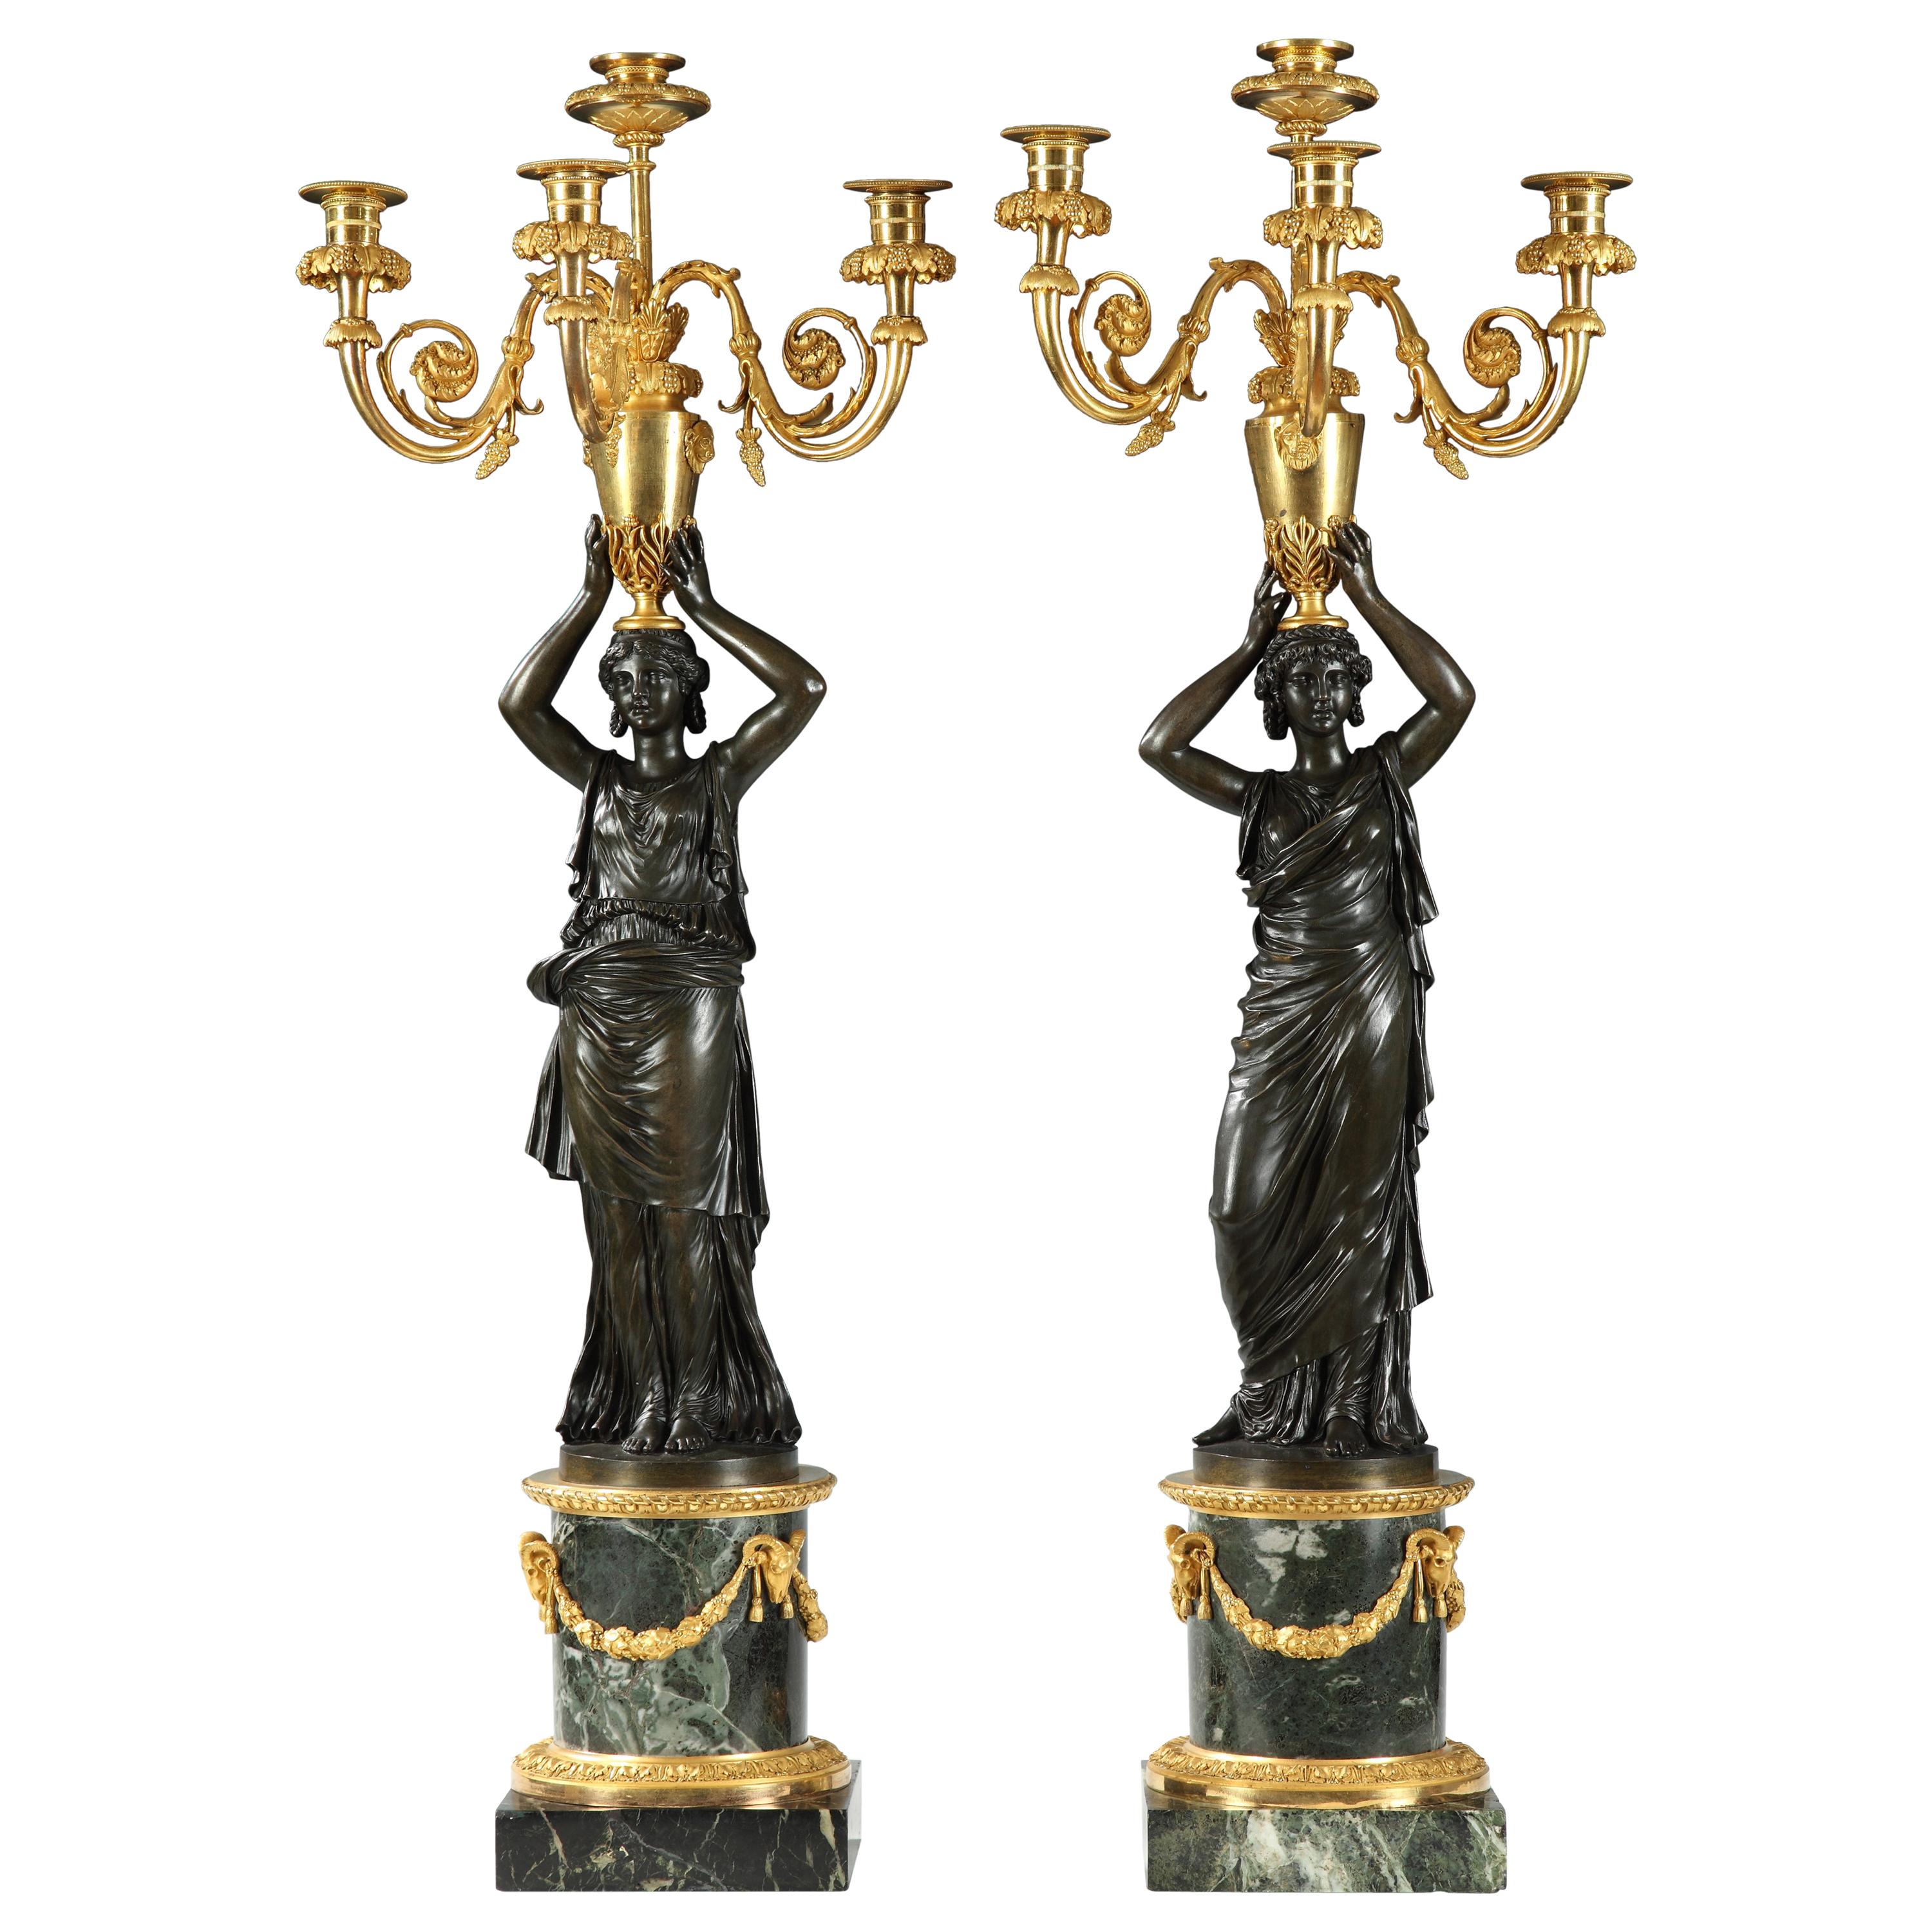 Pair of "Athenians" Candelabras Attributed to H. Auguste, France, Circa 1785